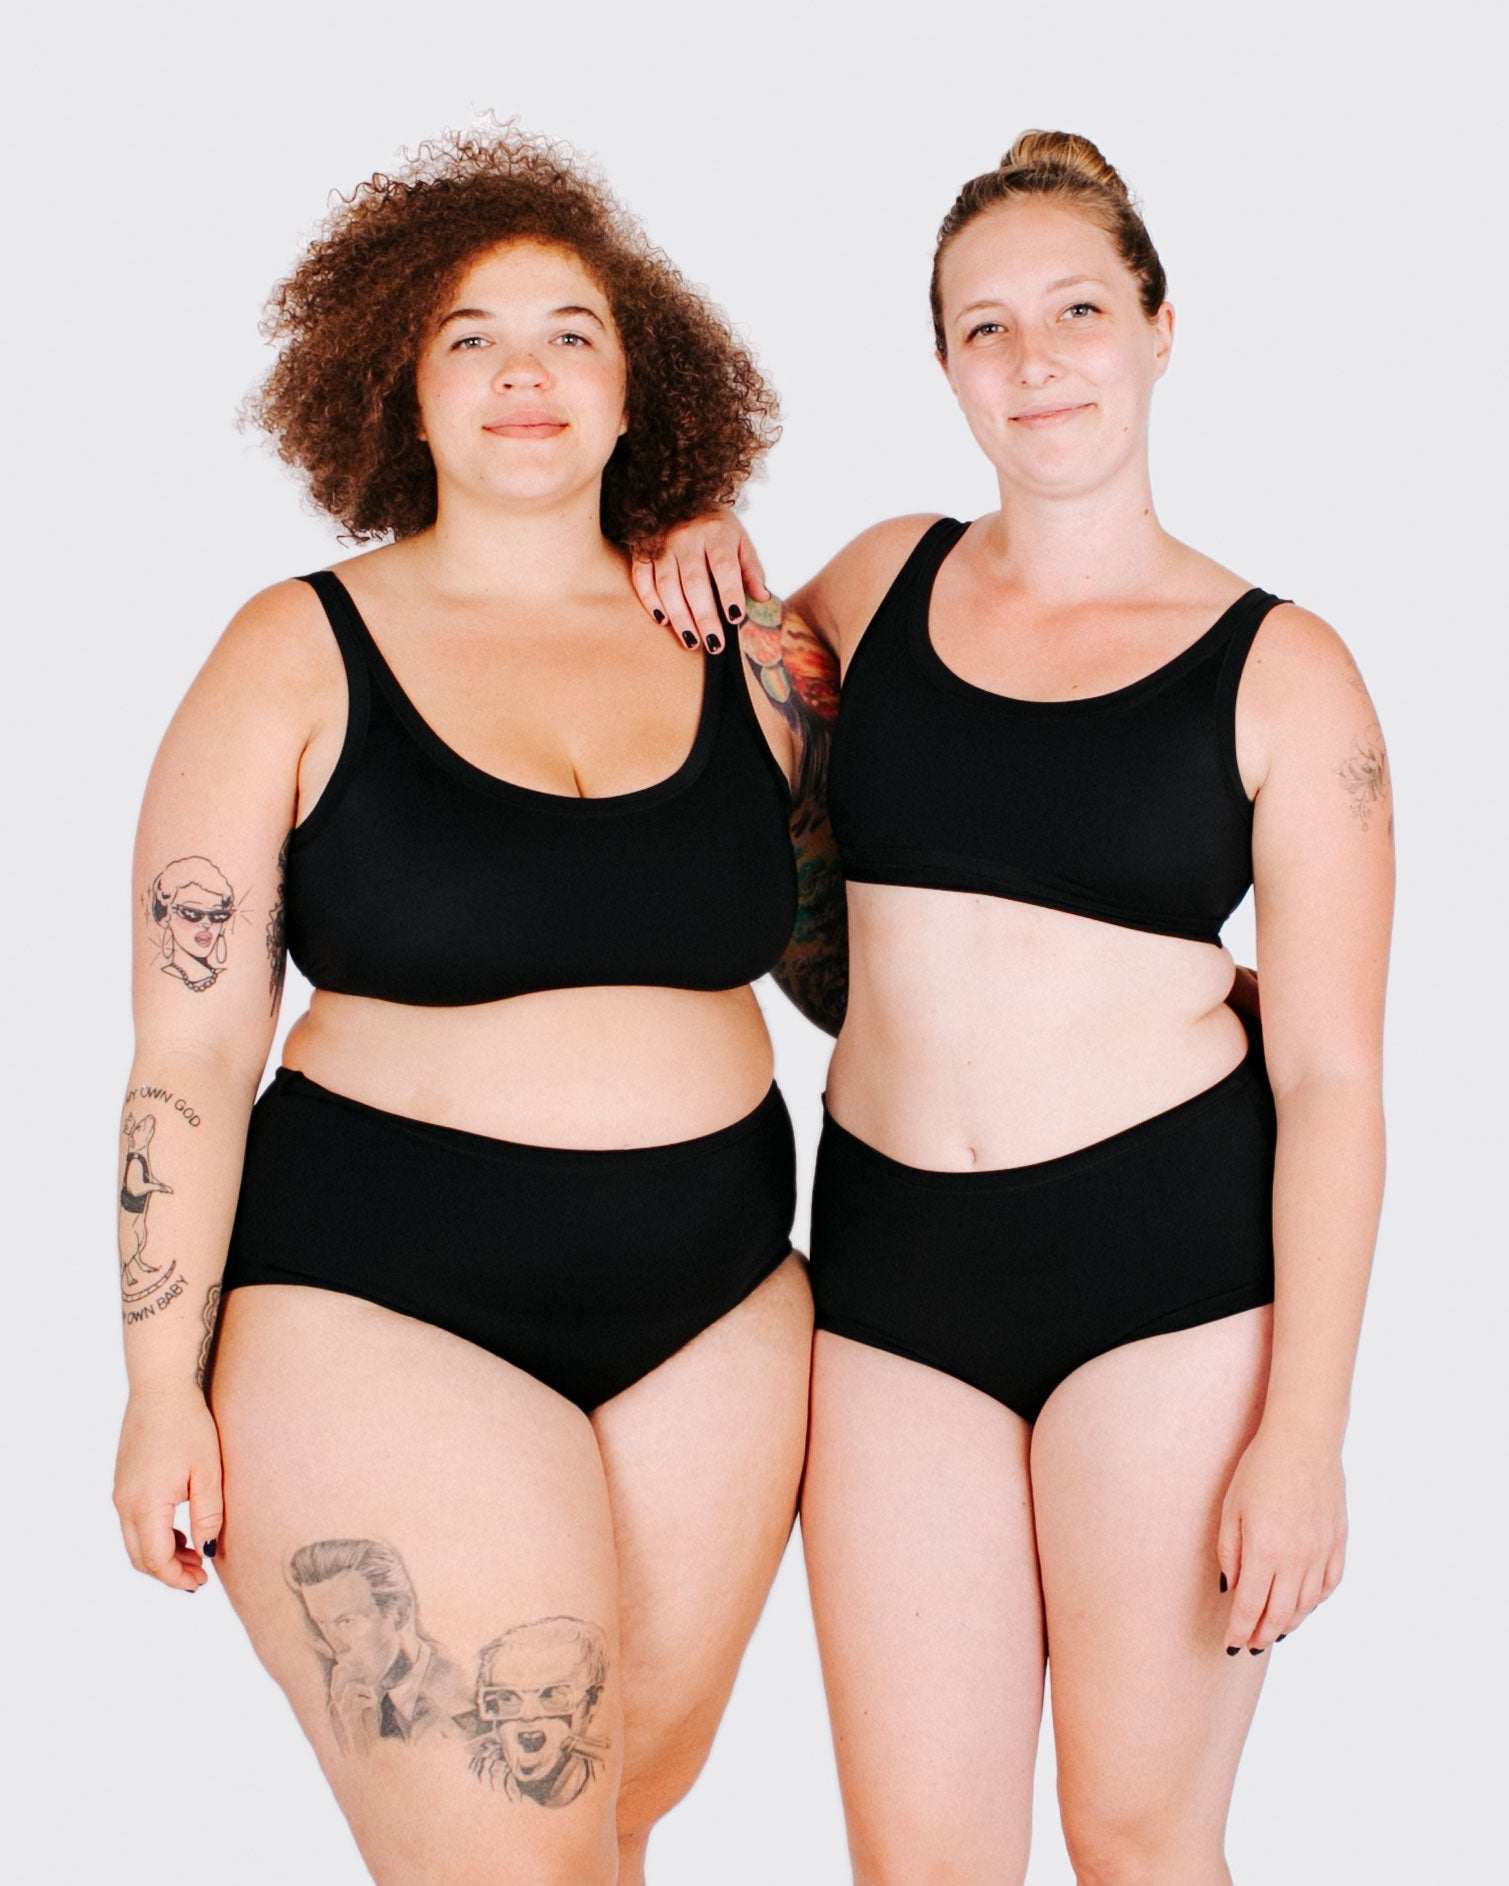 Fit photo from the front of Thunderpants recycled nylon Swimwear Top and Original style Swimwear bottoms in Plain Black on two models standing together.